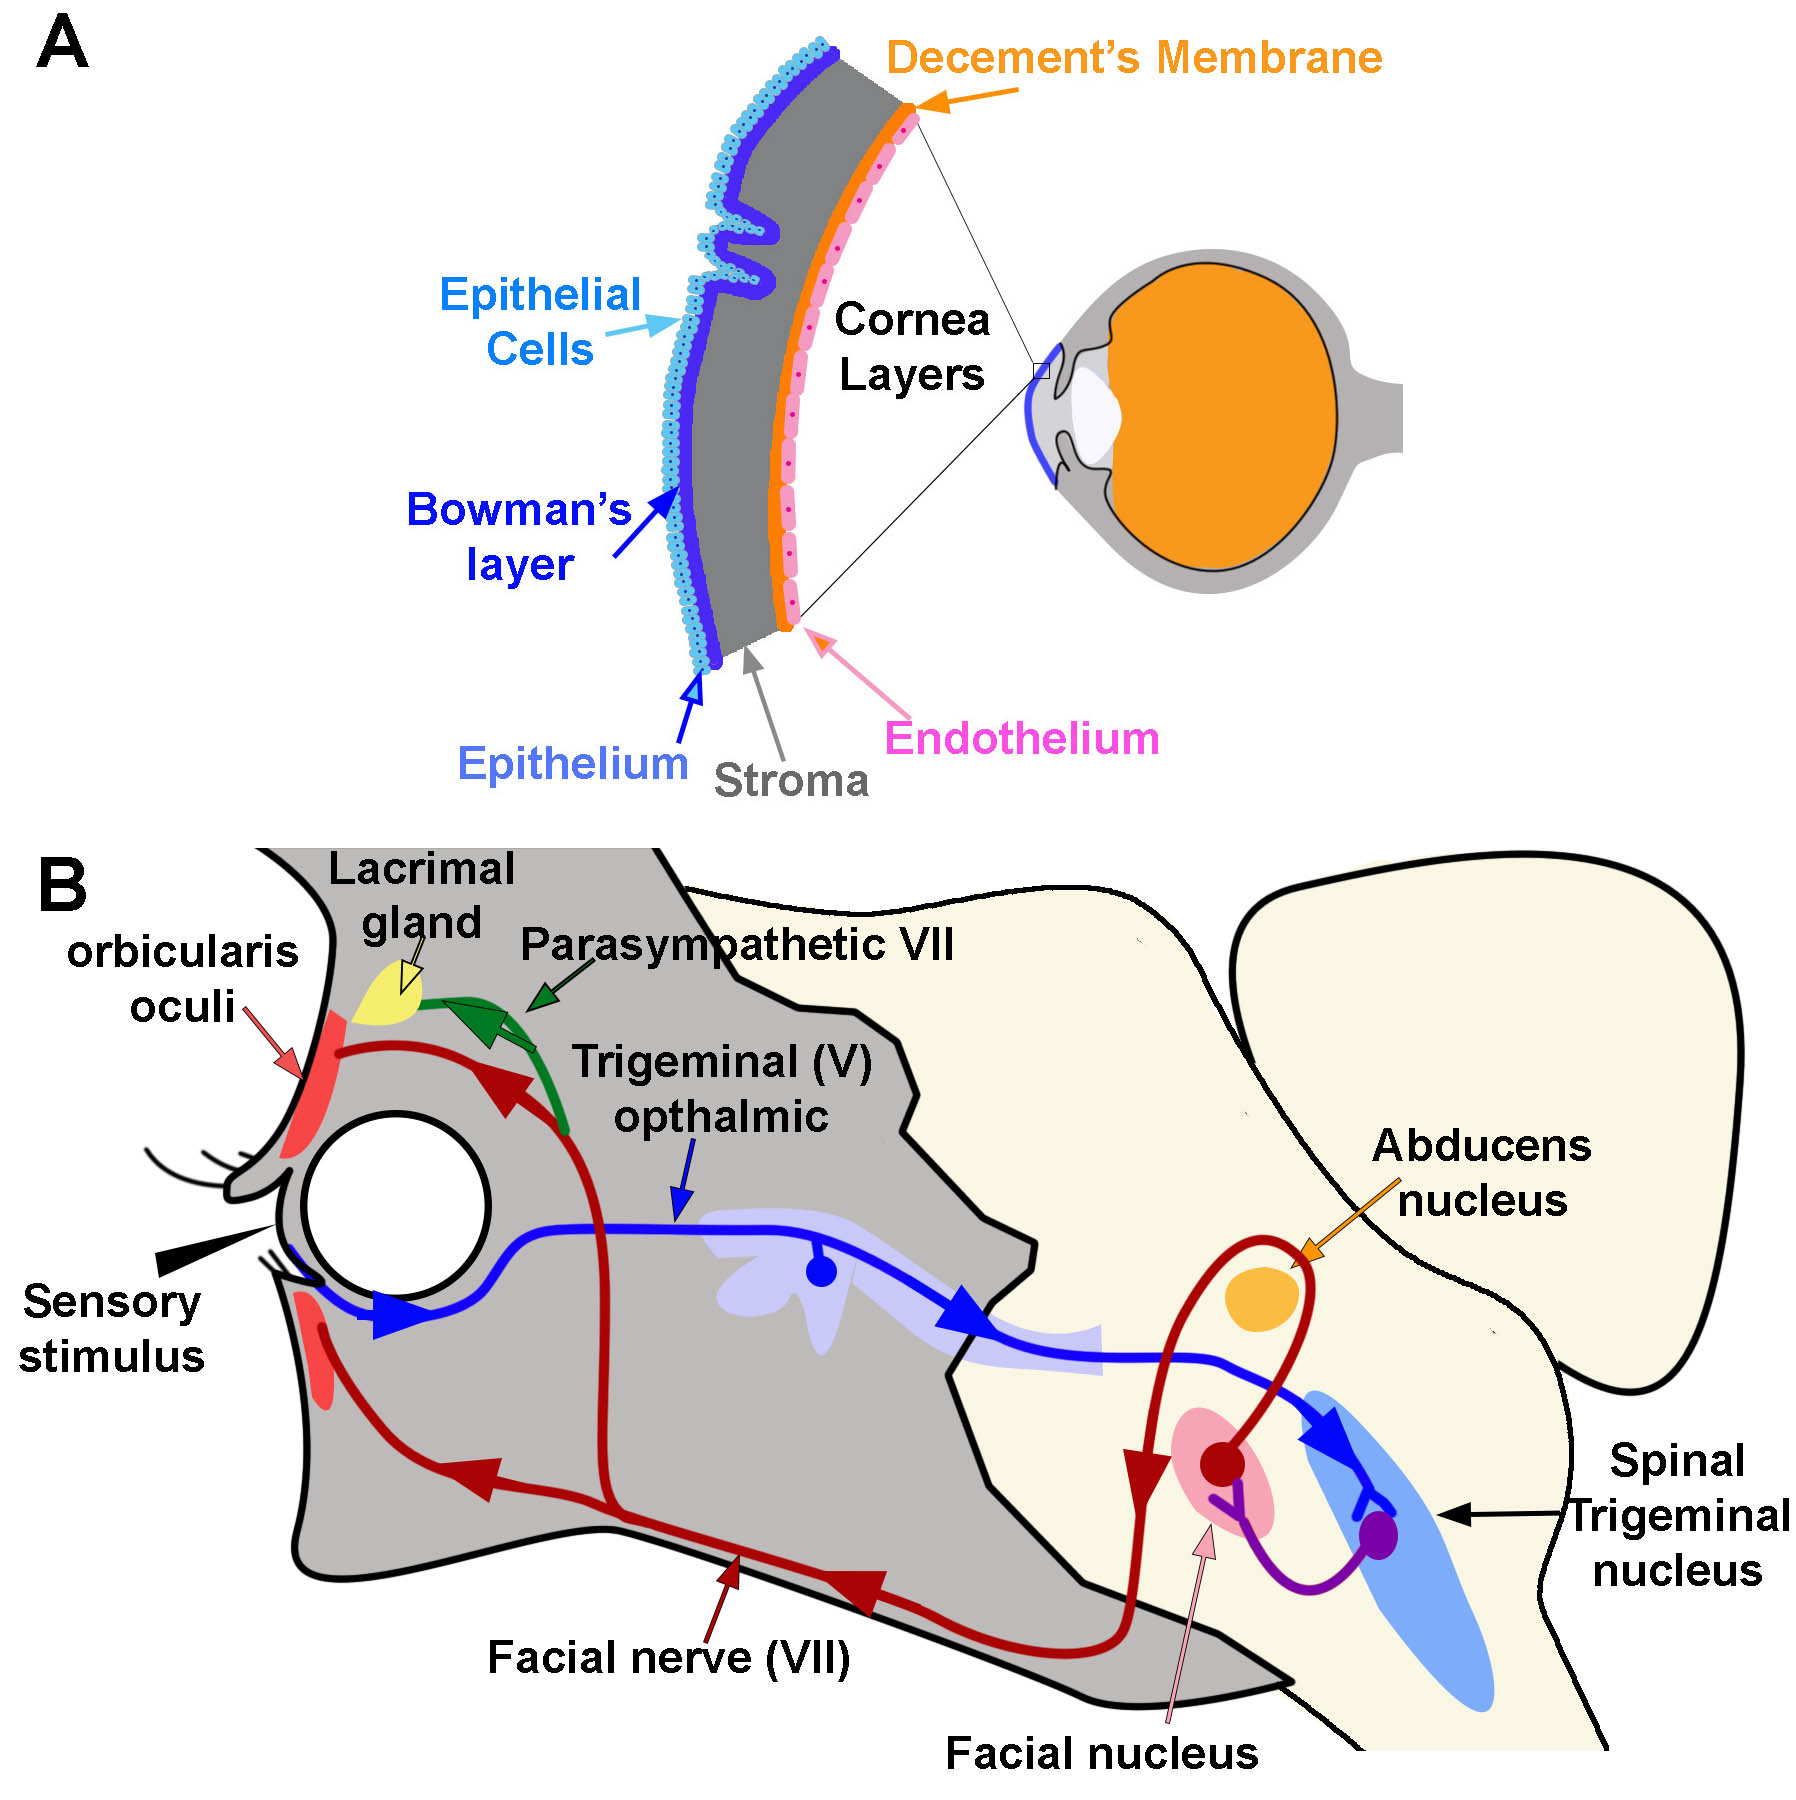 Corneal Reflex. A) Diagram of the location and layers of the cornea. B) Corneal Reflex. The blink reflex circuit is shown in blue, purple, and red. Arrows indicate the direction of flow. The tear production reflex utilizes the same pathways as the blink reflex. However it activates the lacrimal gland via parasympathetic branches (green line)